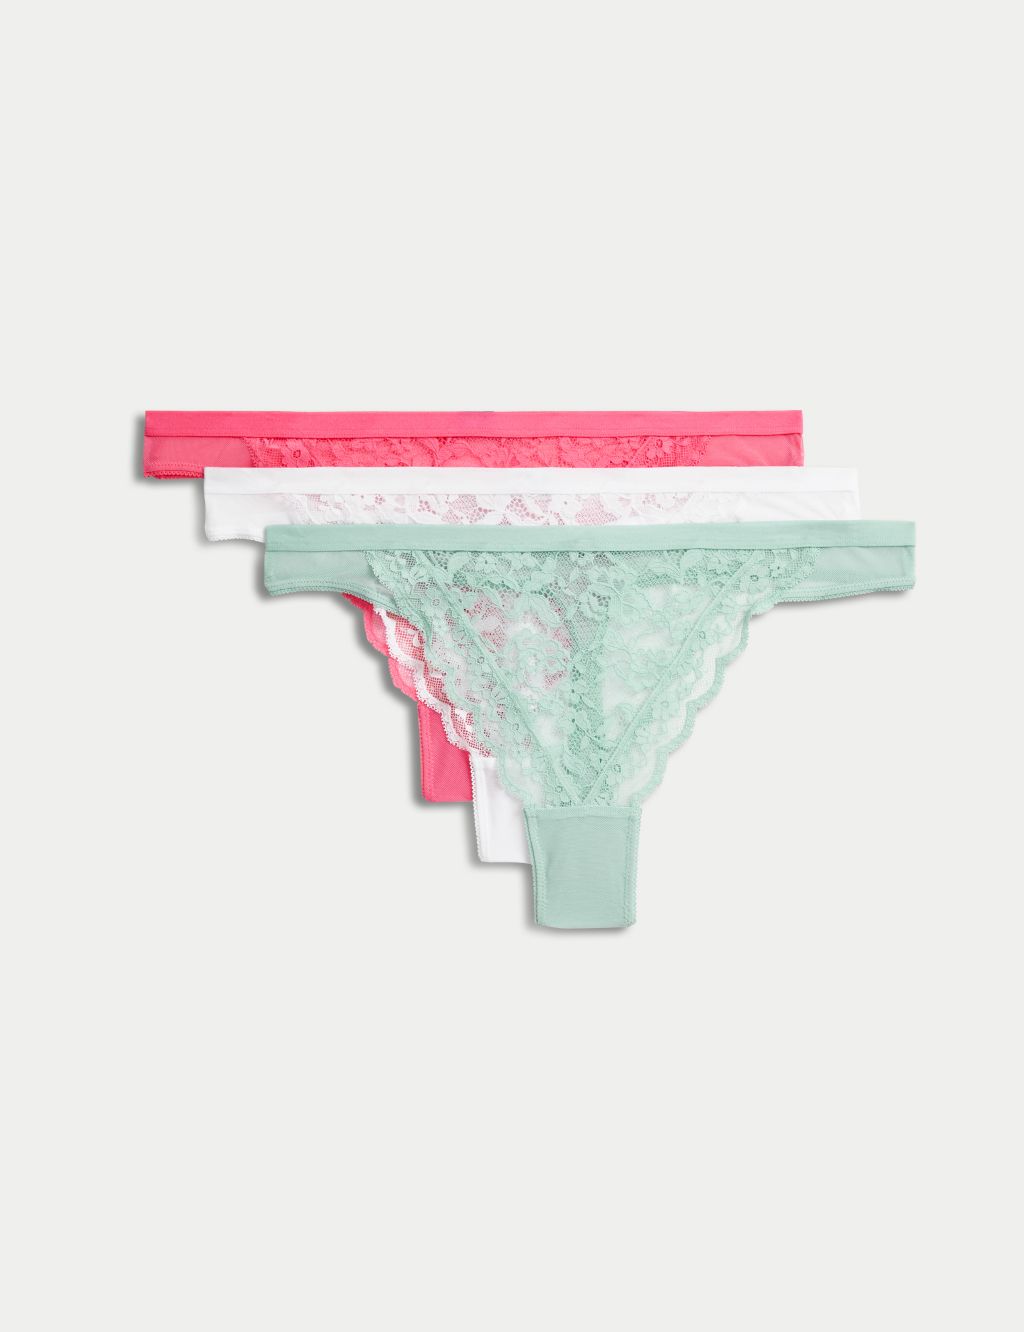 NEW! M&S Marks & Spencer fuchsia lace no VPL thong G-string